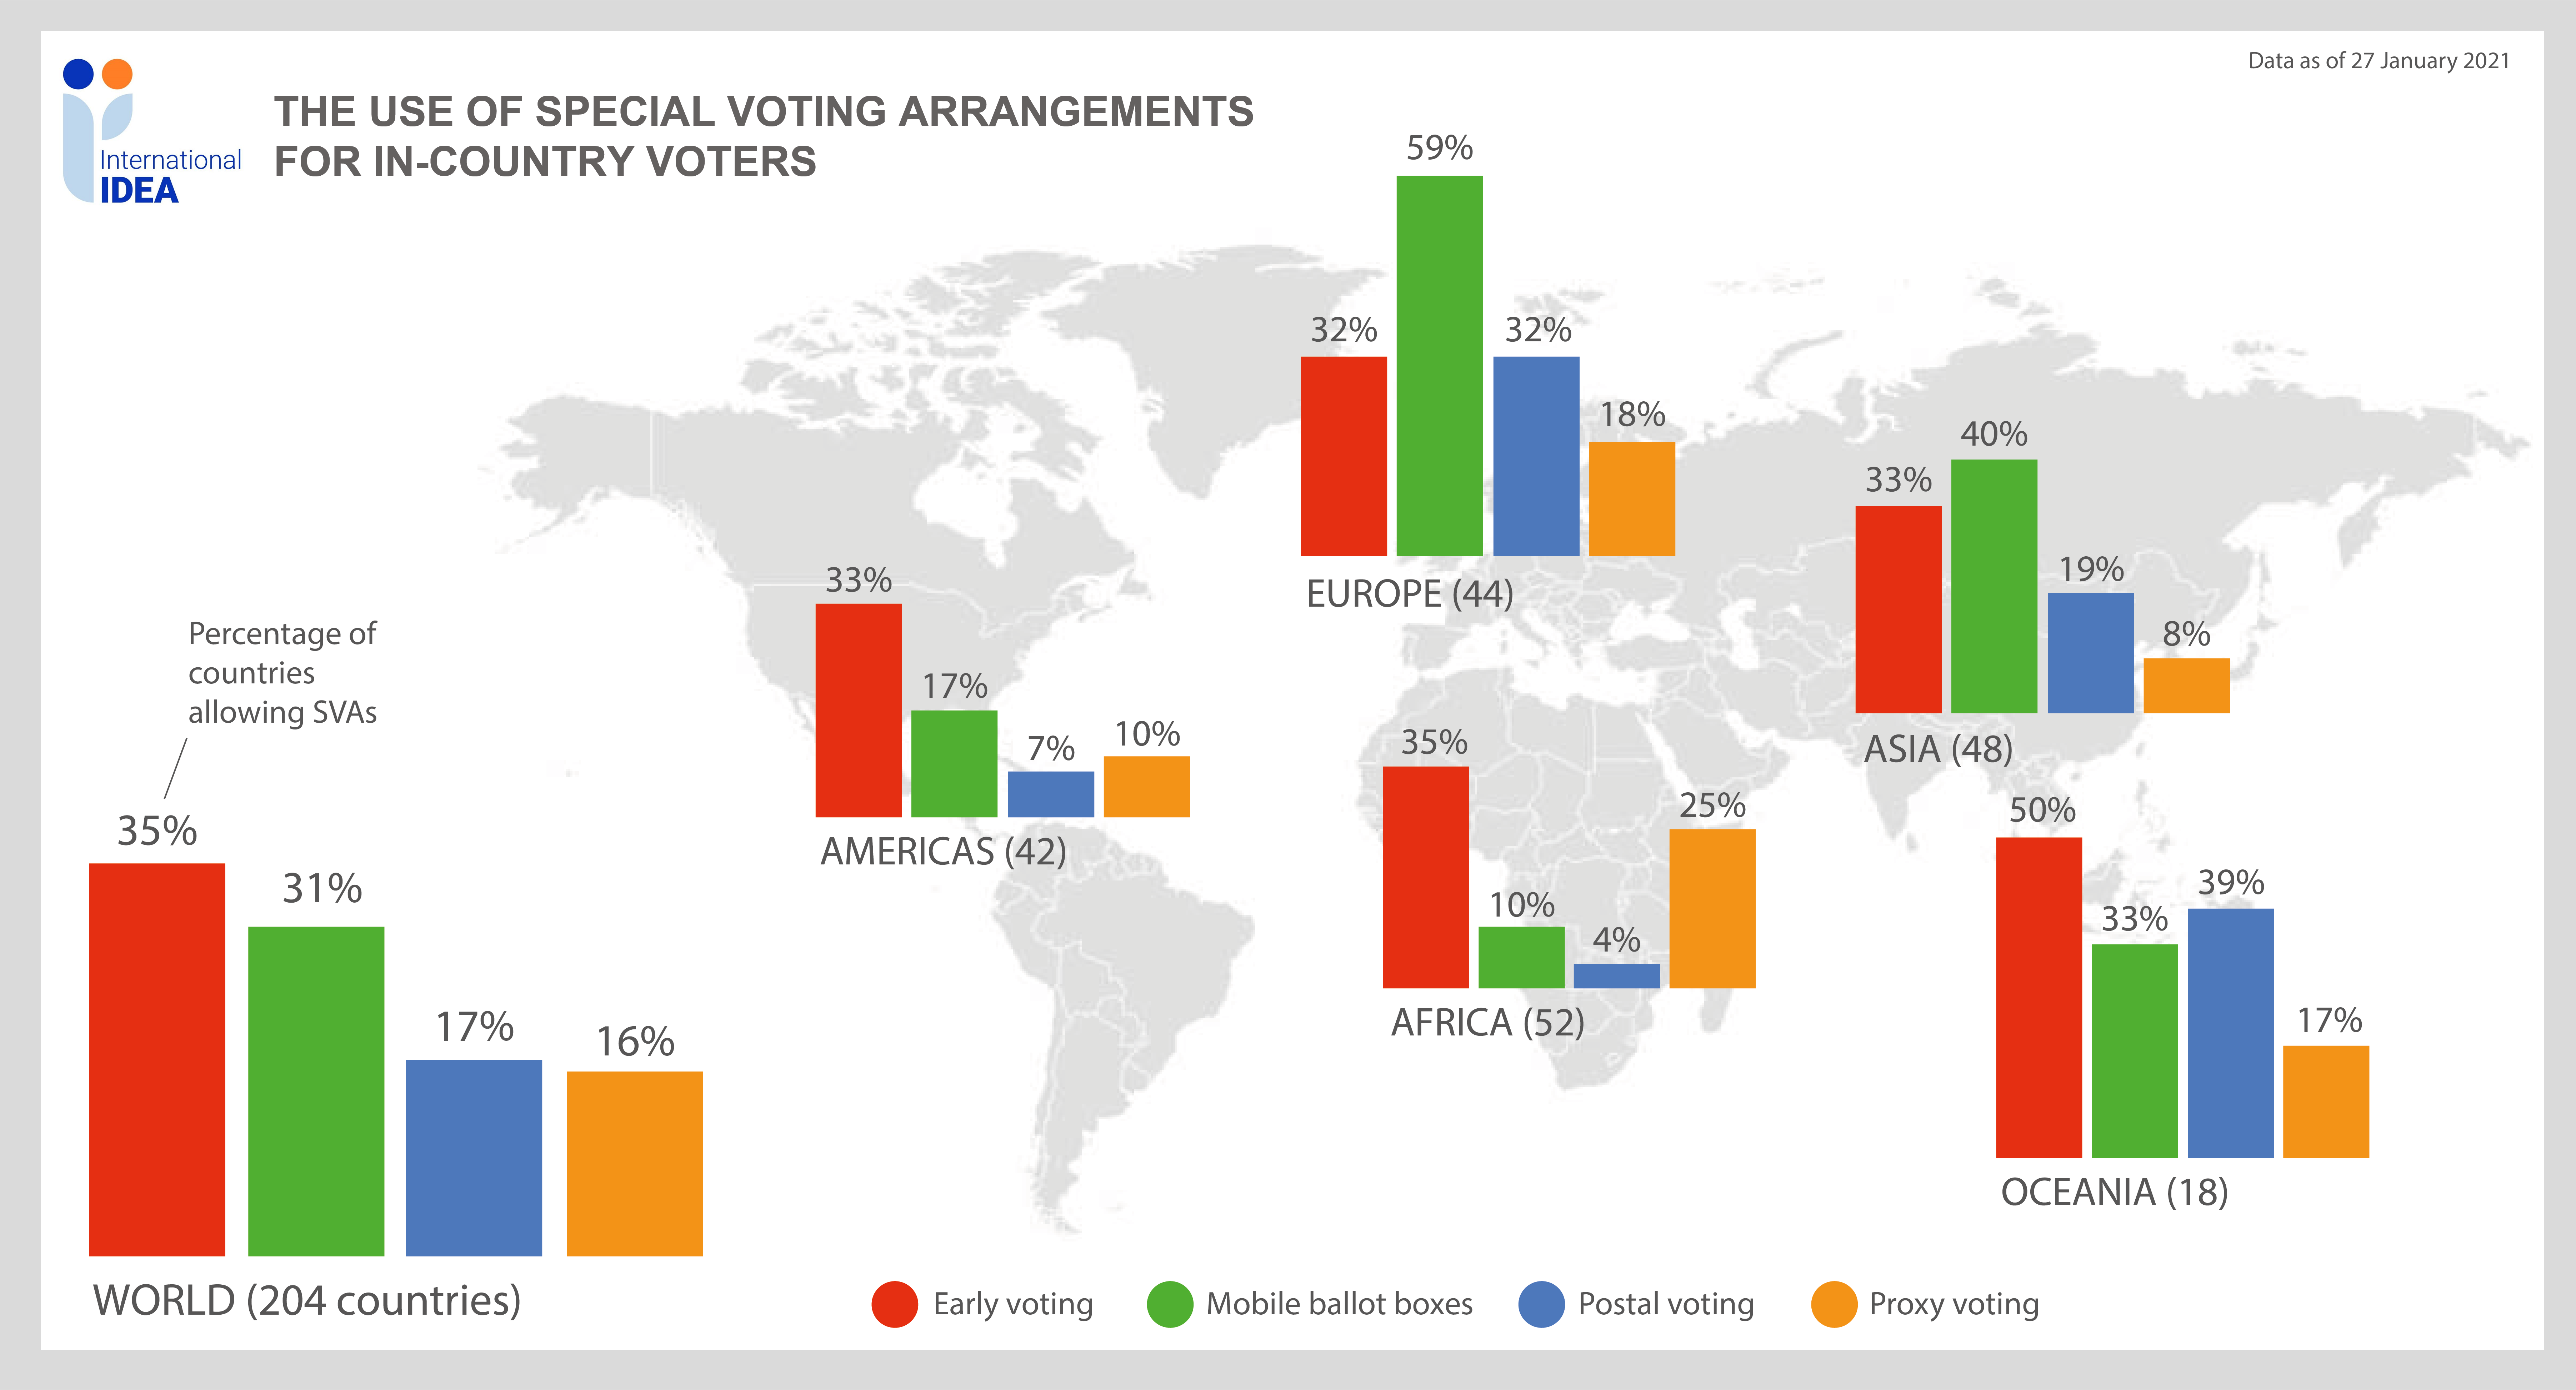 Figure 2: Use of different types of SVAs for in-country voters around the world.